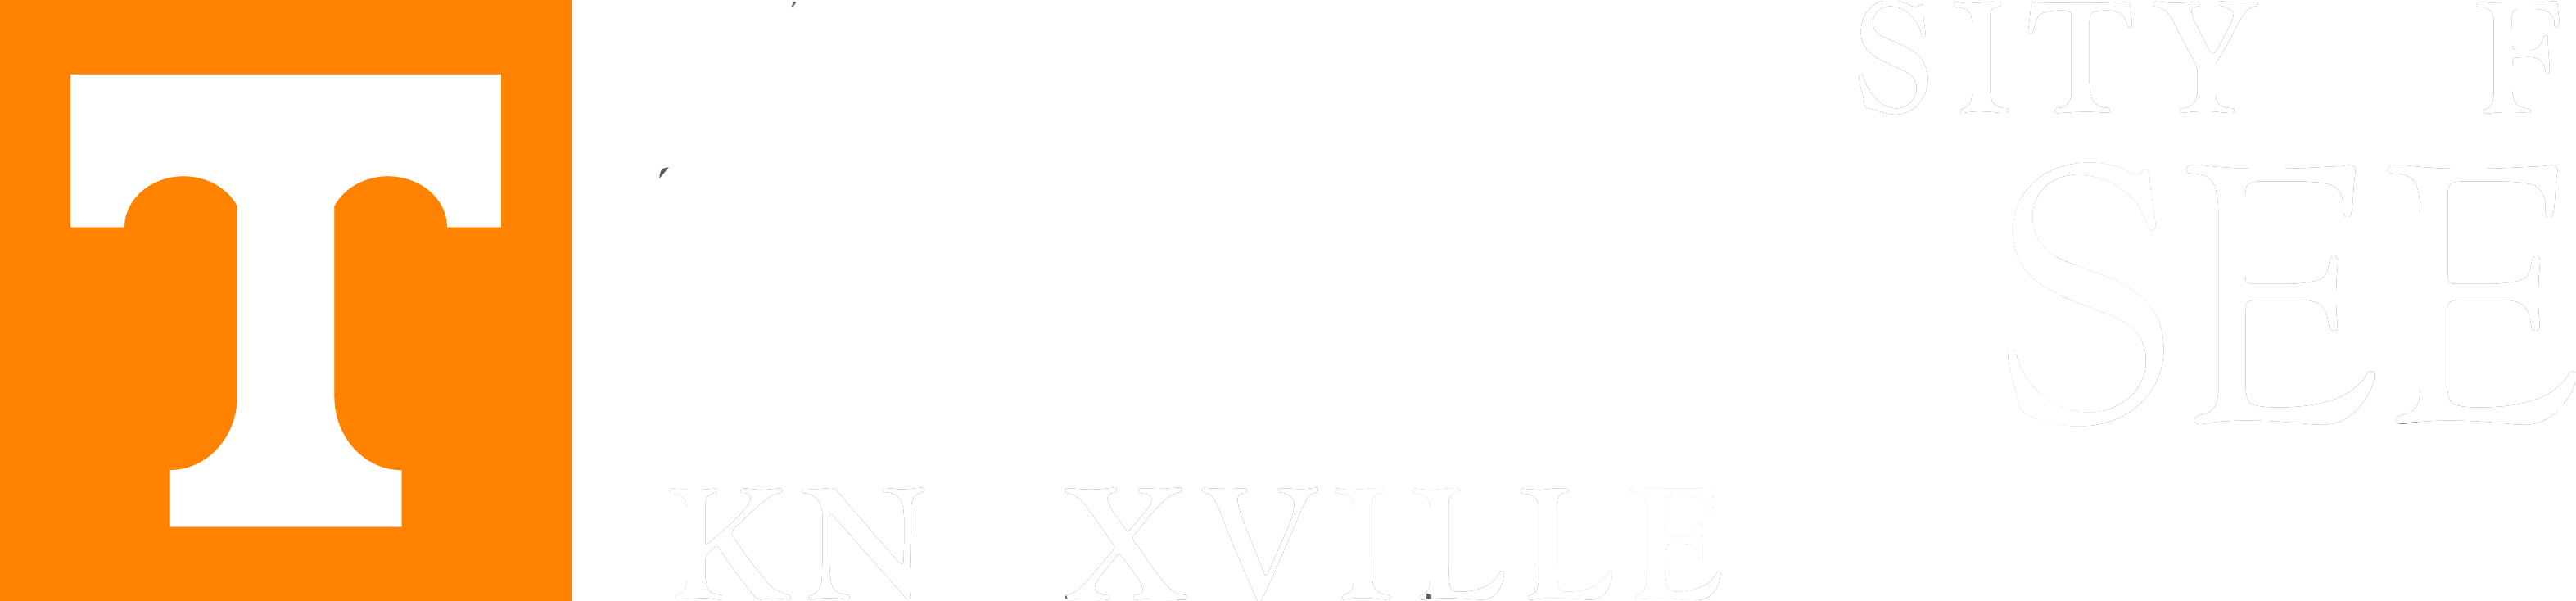 EECS at the University of Tennessee at Knoxville